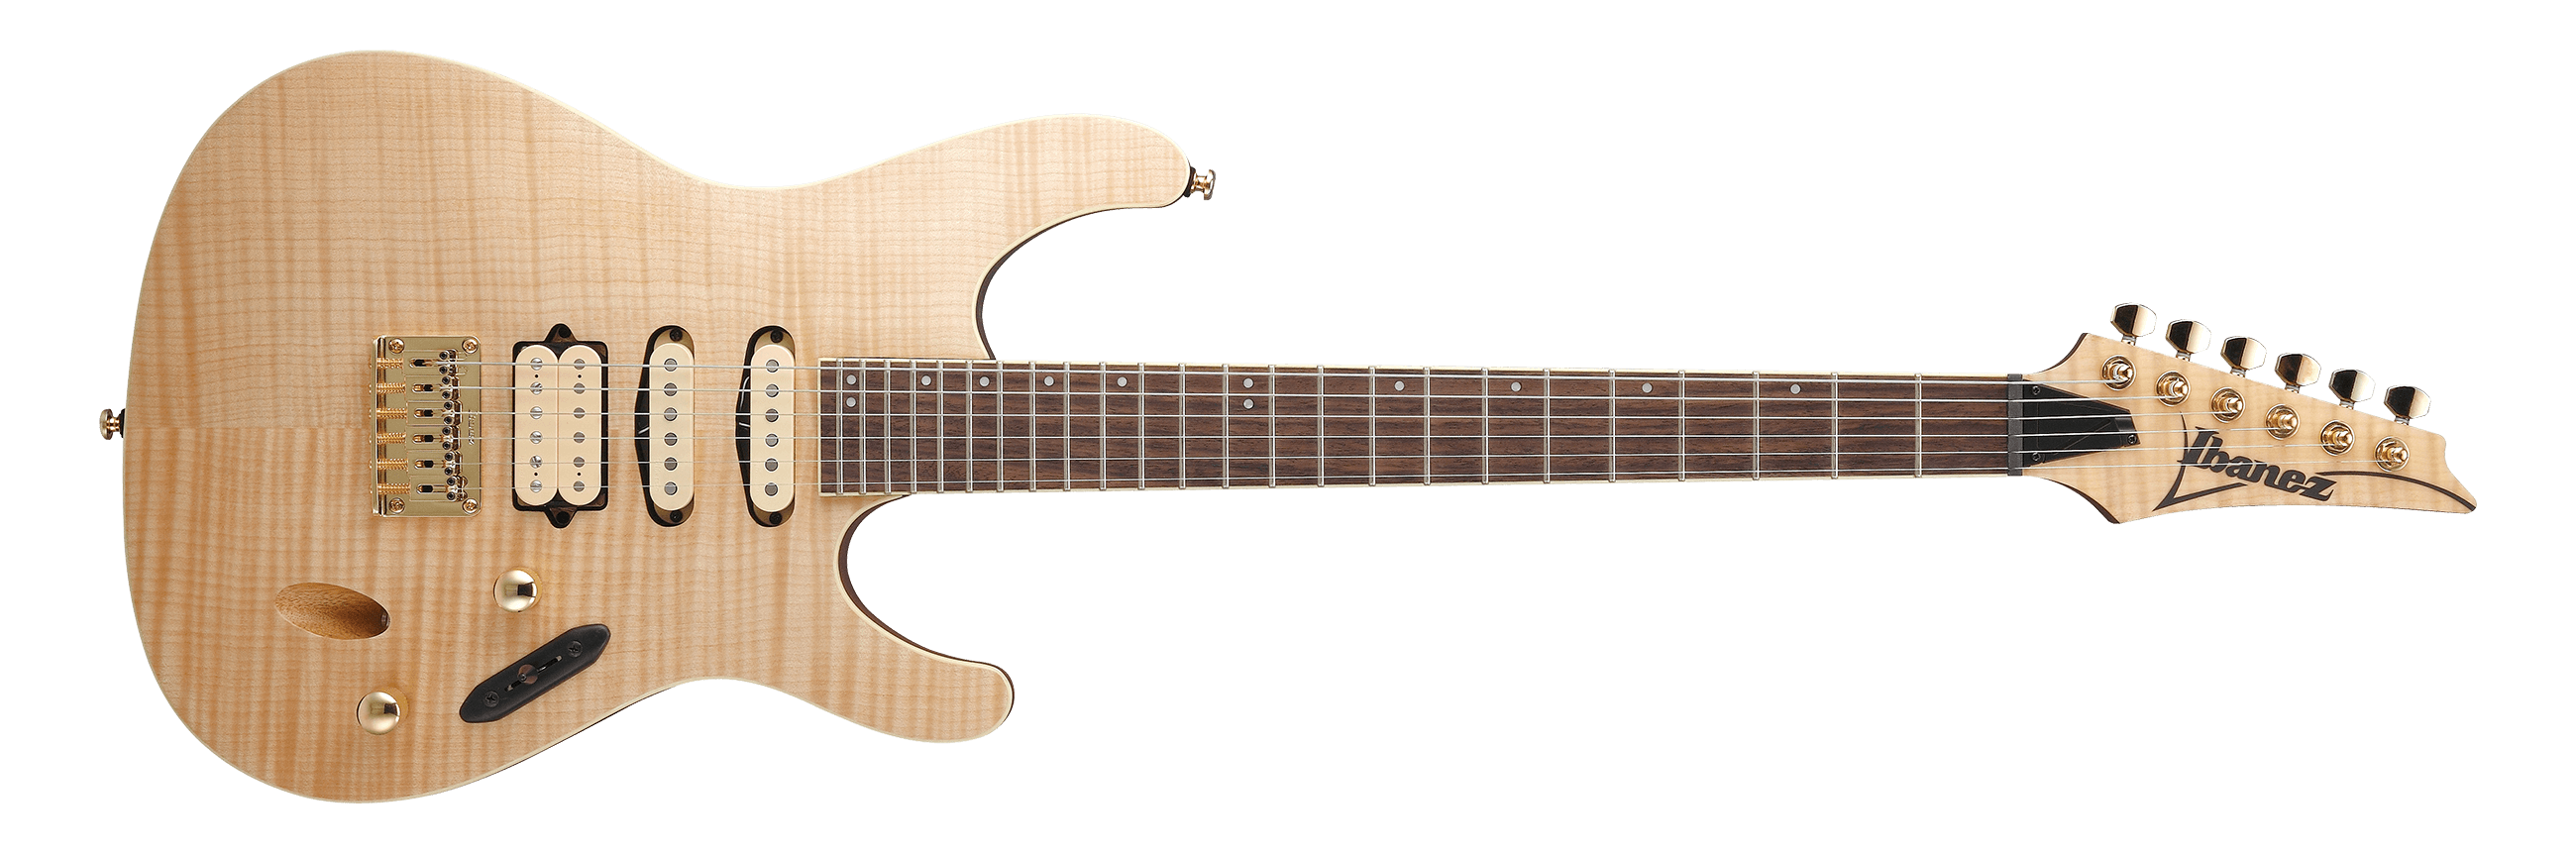 IBANEZ SEW761FMNTF - Electric Guitar - Natural Flat | Jack's On Queen